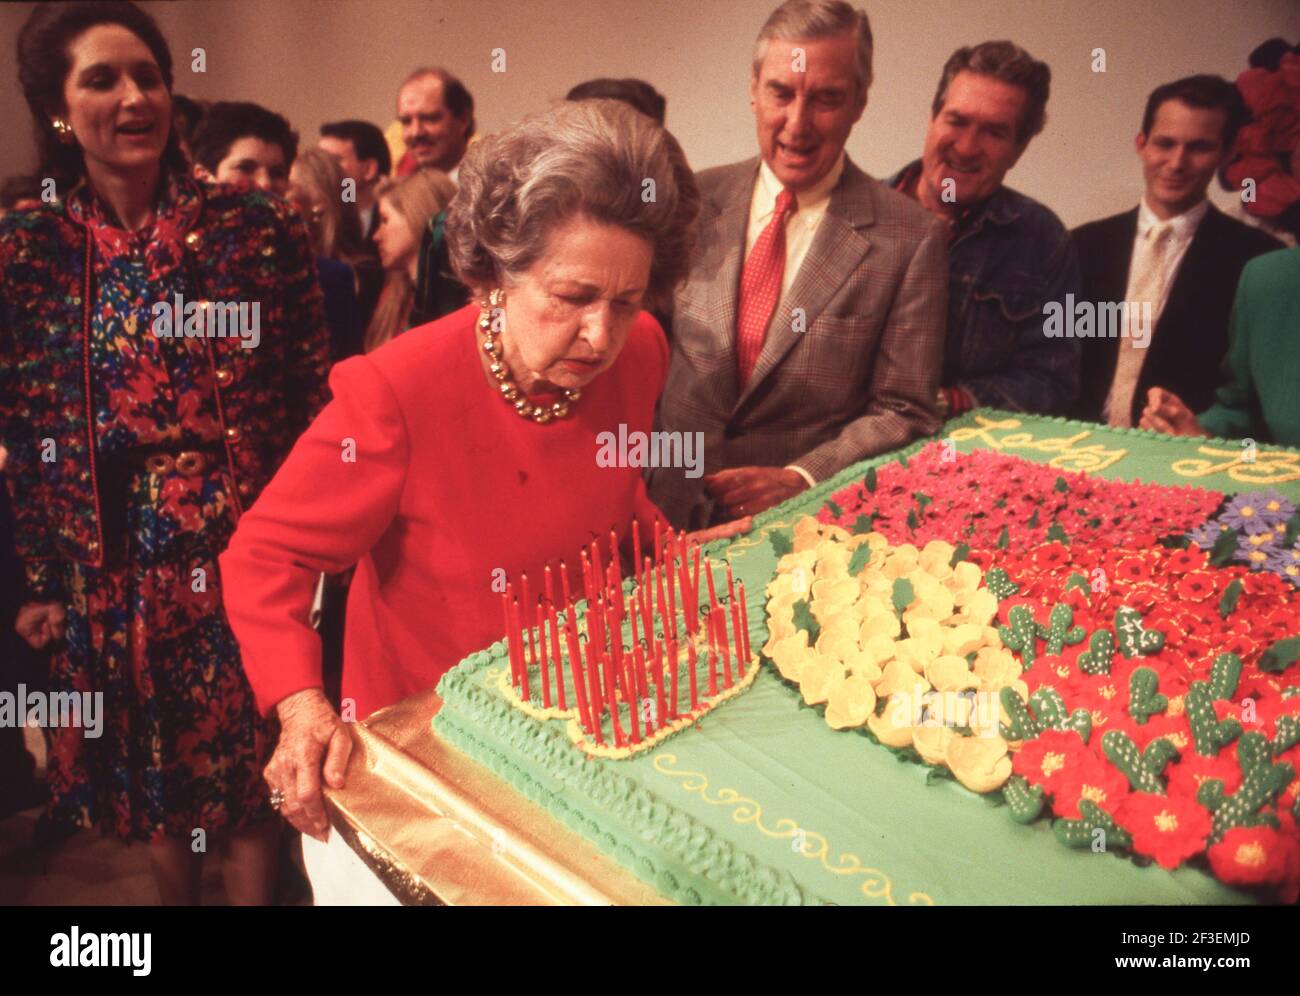 Retrospective on the life of former First Lady, Lady Bird Johnson during her years in Texas after the death of former President Lyndon Baines Johnson on January 22, 1973. This photo shows Lady Bird celebrating her 80th birthday at the LBJ Library on December 5, 1992. She was born on December 22, 1912. Stock Photo